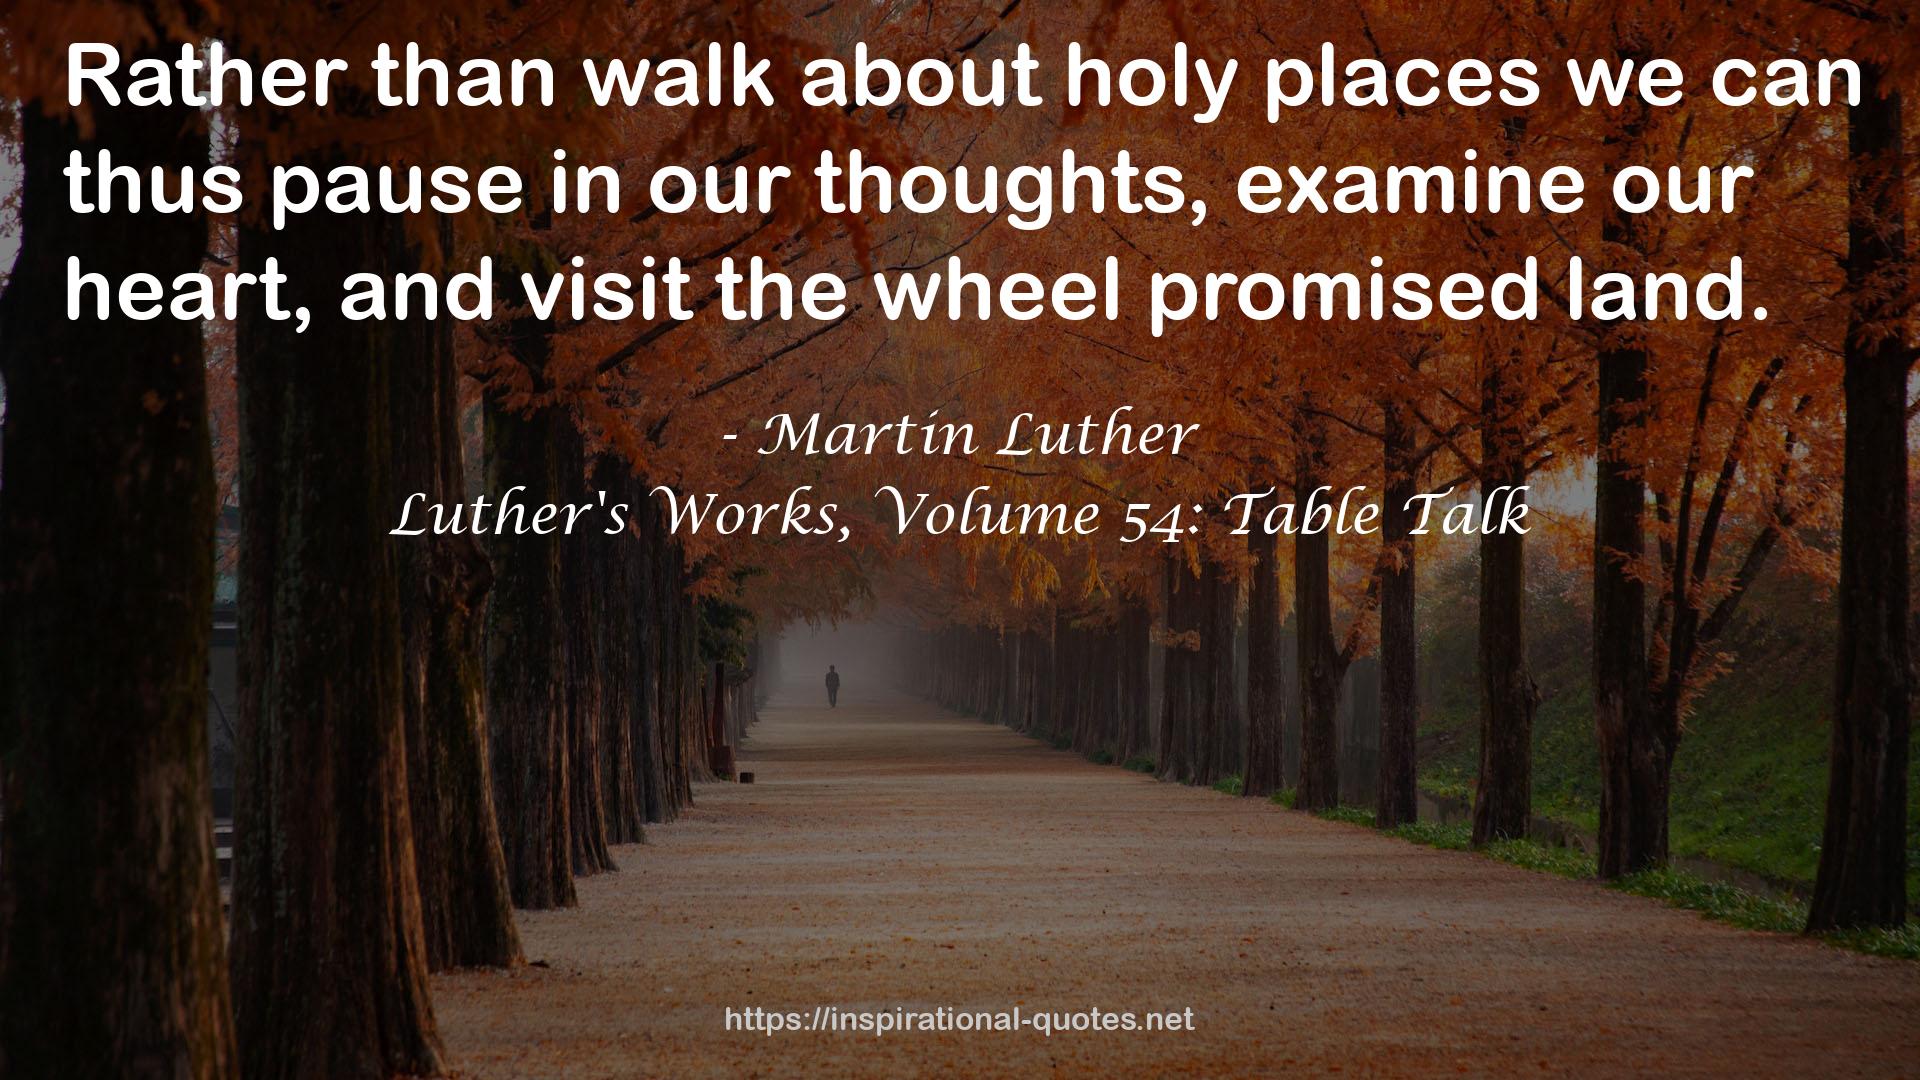 Luther's Works, Volume 54: Table Talk QUOTES